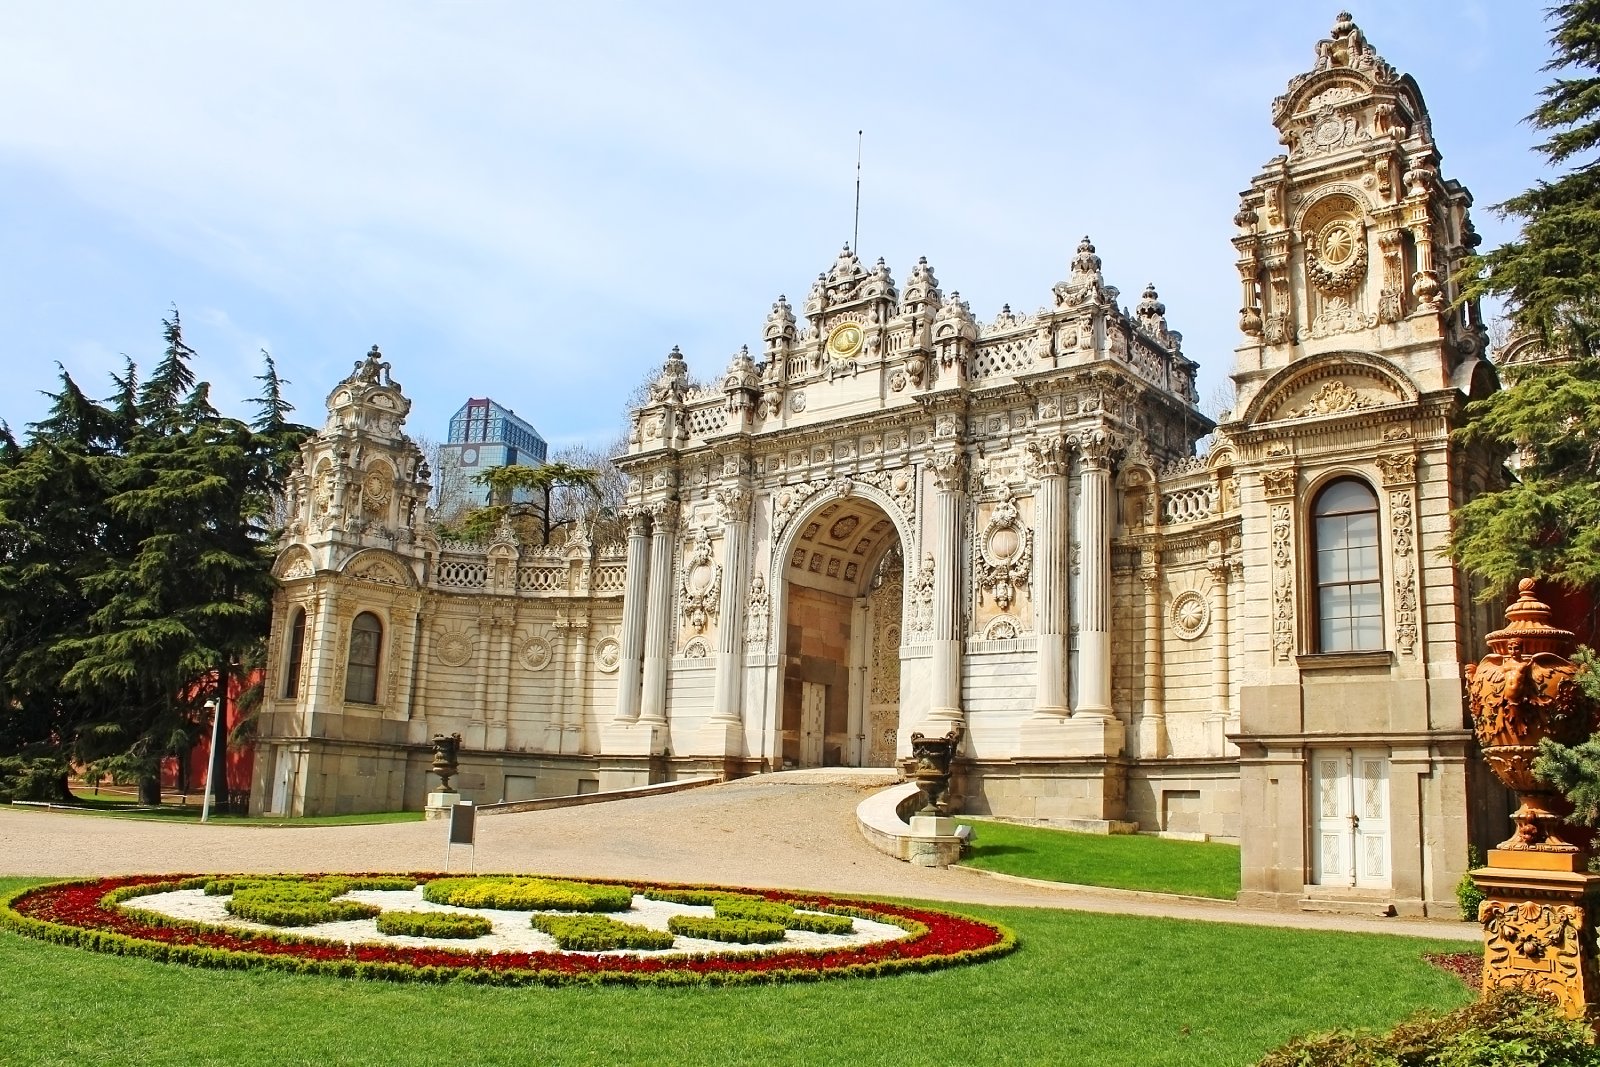 <p class="wp-caption-text">Image Credit: Shutterstock / Gelia</p>  <p><span>Dolmabahce Palace, with its opulent European-inspired design, marks a departure from traditional Ottoman architecture. Built in the 19th century as the administrative center of the Ottoman Empire, the palace features a blend of Baroque, Rococo, and Neoclassical elements, adorned with lavish interiors, crystal chandeliers, and extensive gardens. A tour of Dolmabahce Palace offers insights into the empire’s final years and the lavish lifestyle of its last sultans.</span></p>